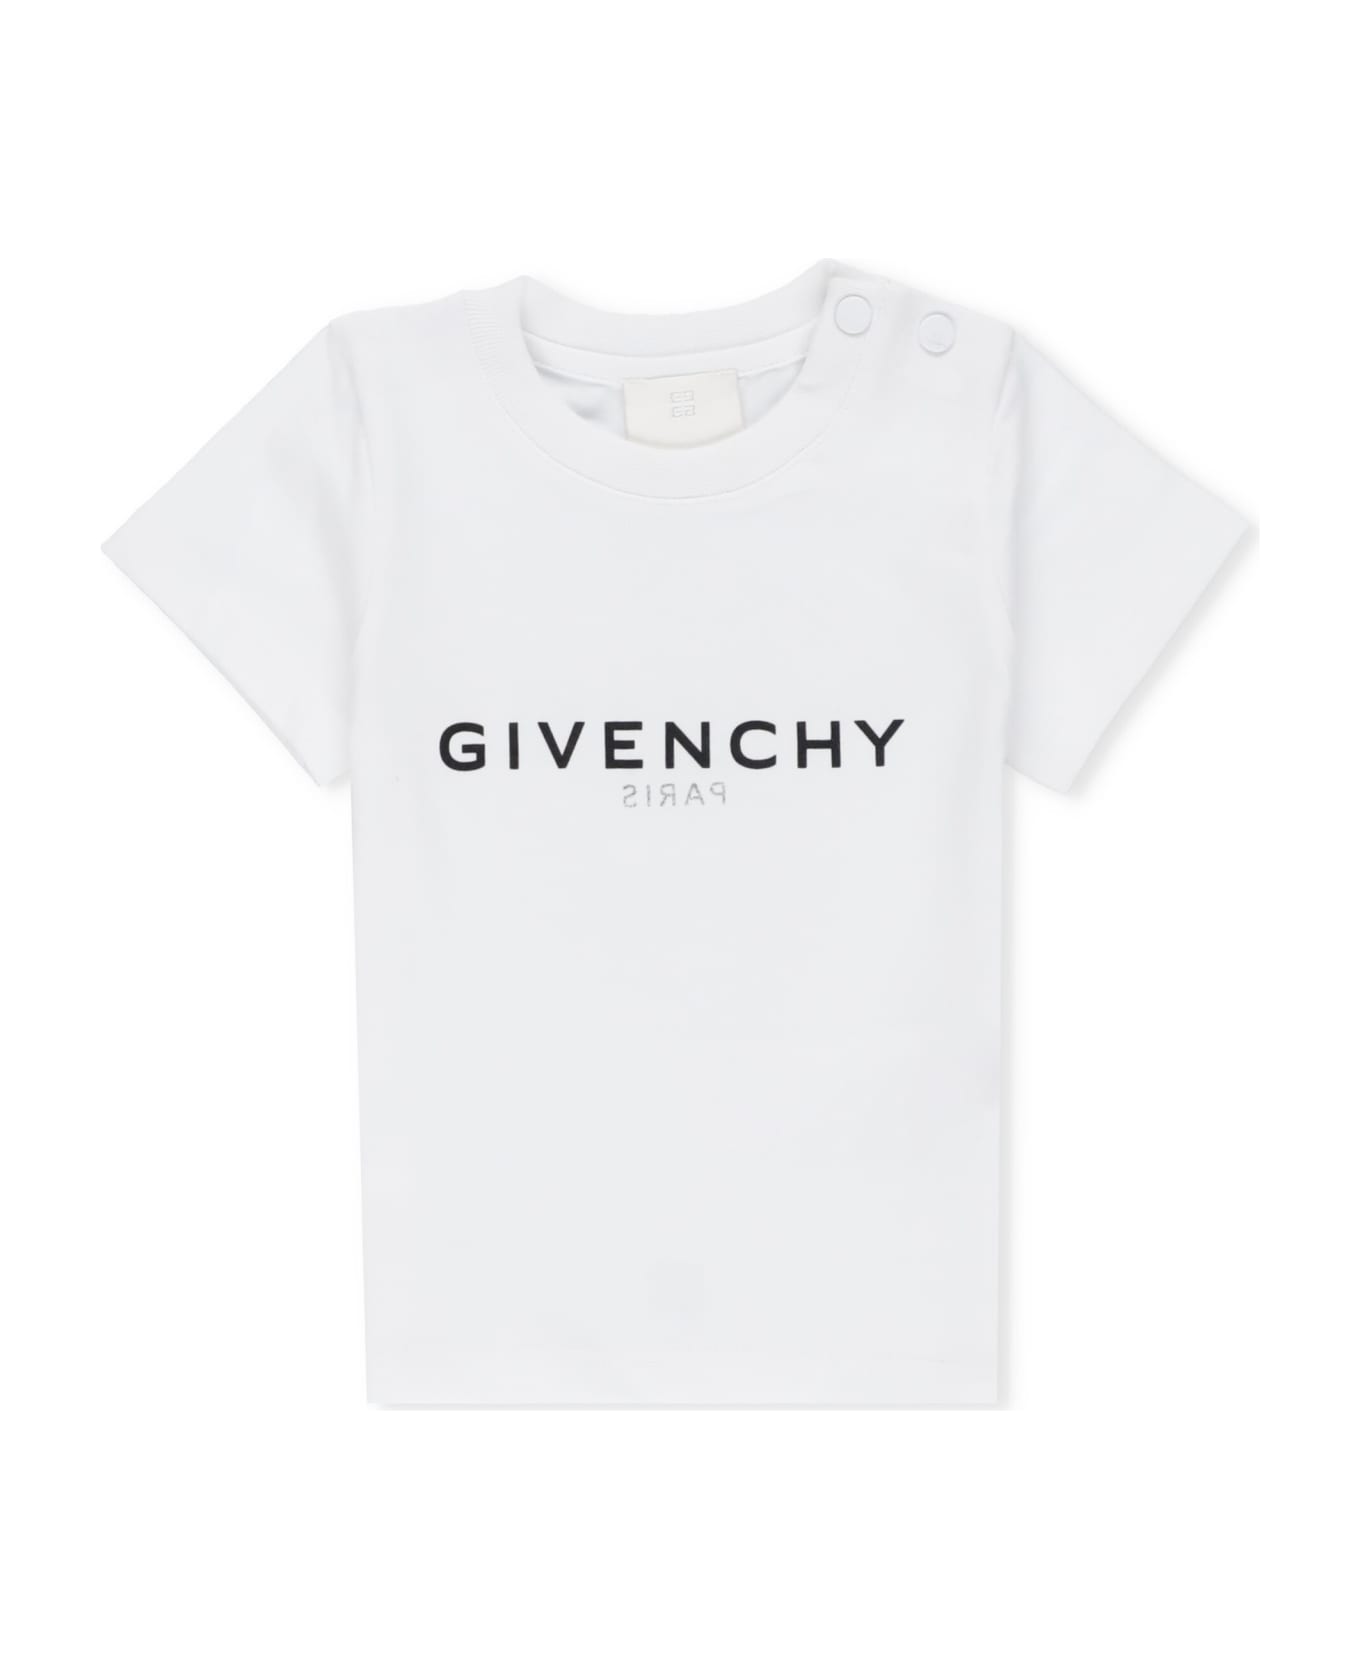 Total 67+ imagen italist givenchy